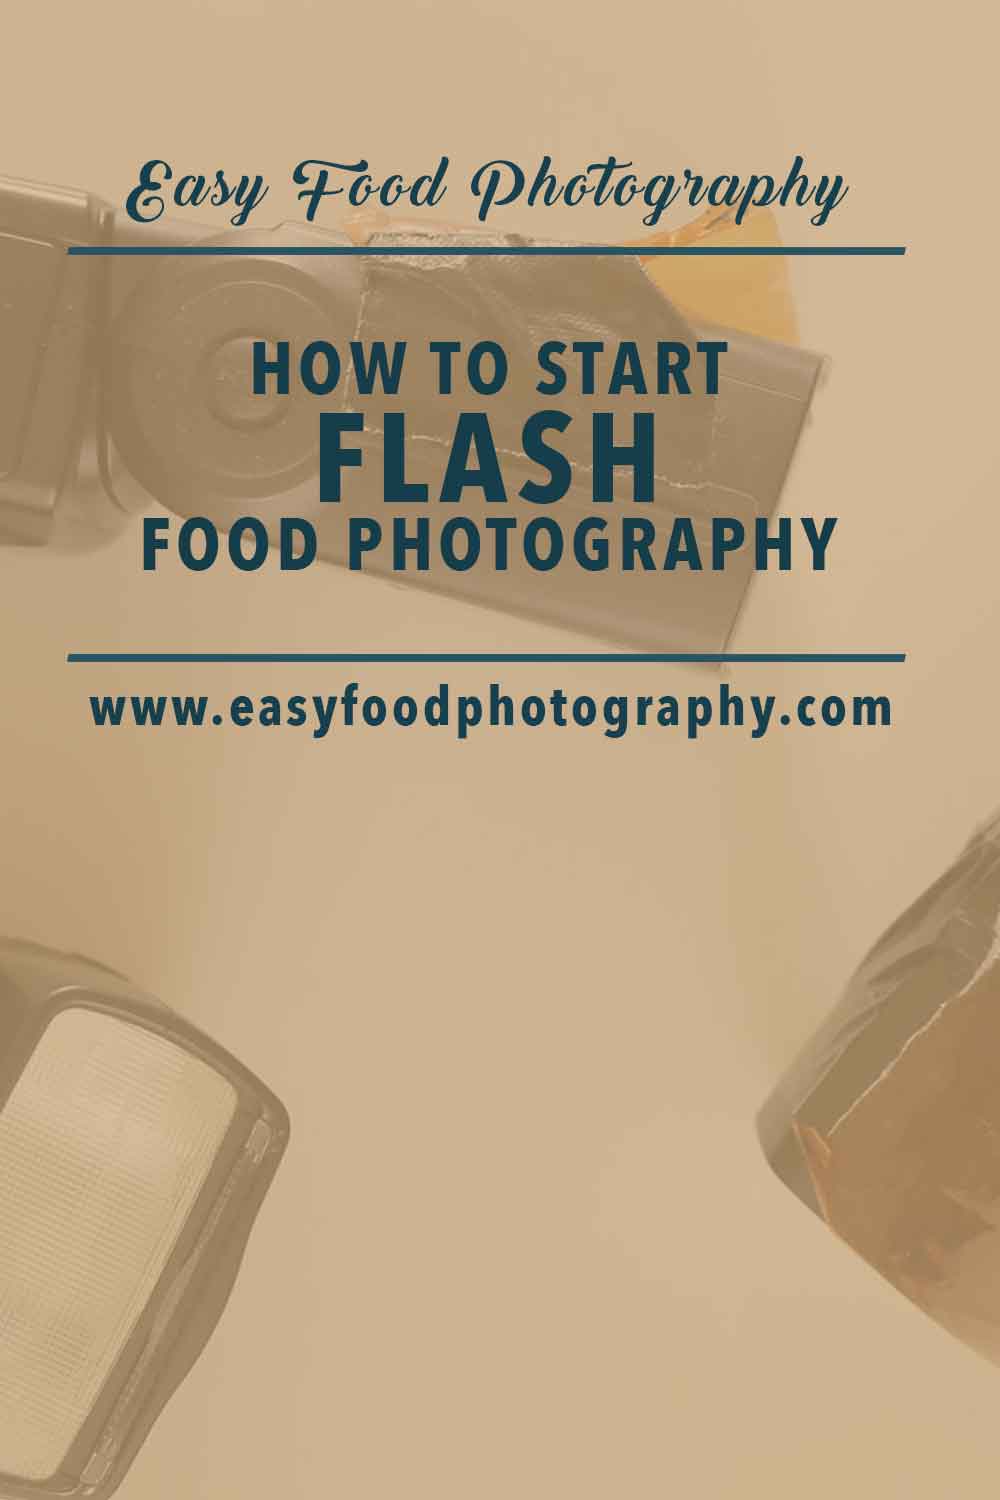 HOW TO START FLASH FOOD PHOTOGRAPHY